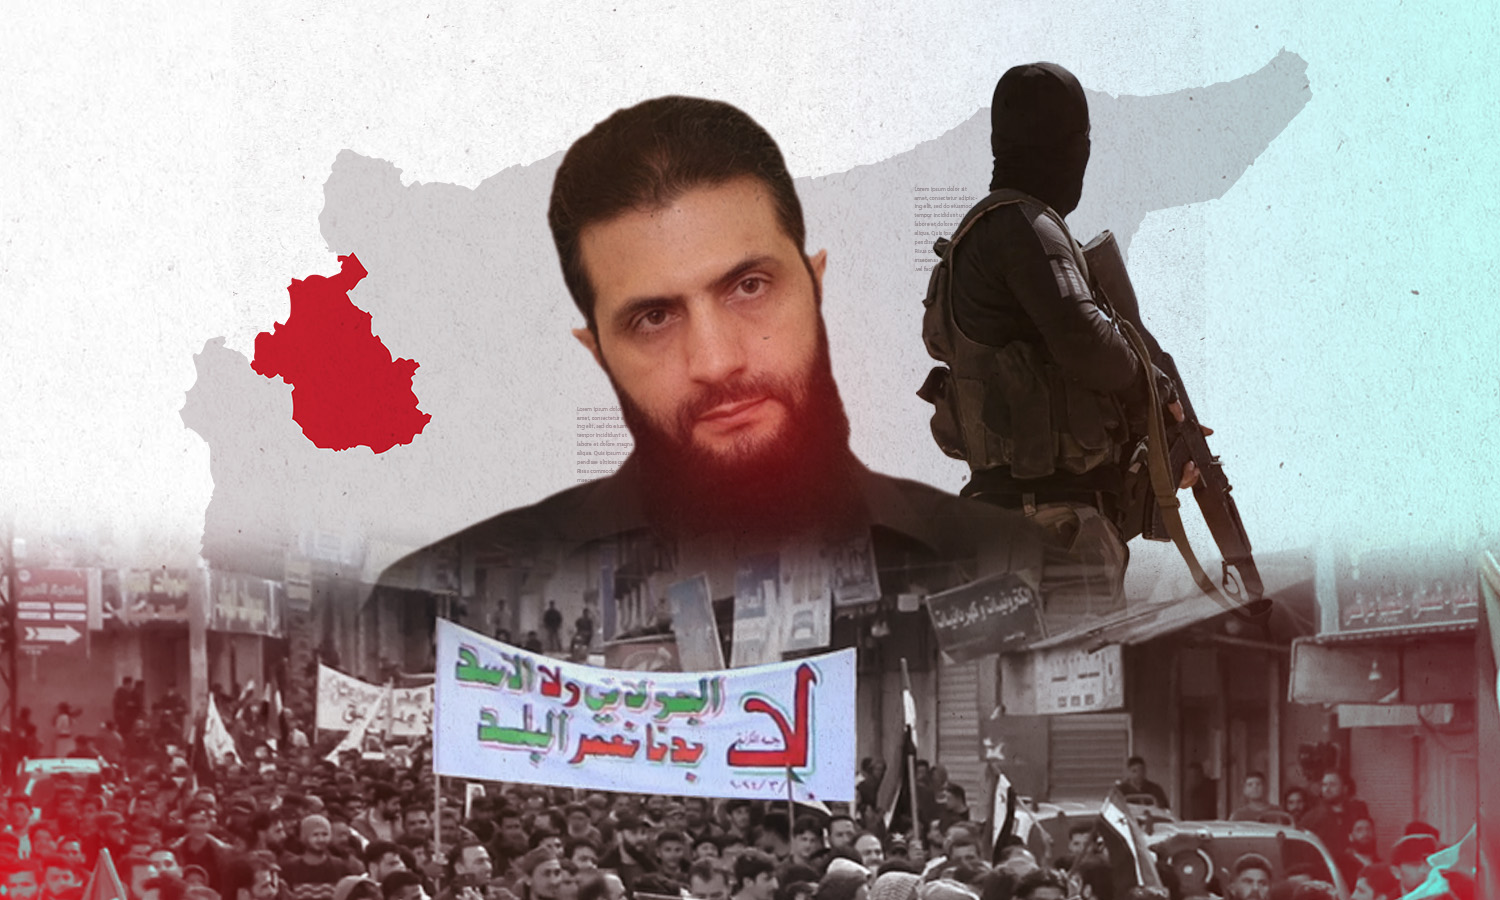 The popular movement against the commander of Hayat Tahrir al-Sham in Idlib, Abu Mohammad al-Jolani, enters its fourth month, carrying demands for his overthrow (Edited by Enab Baladi)